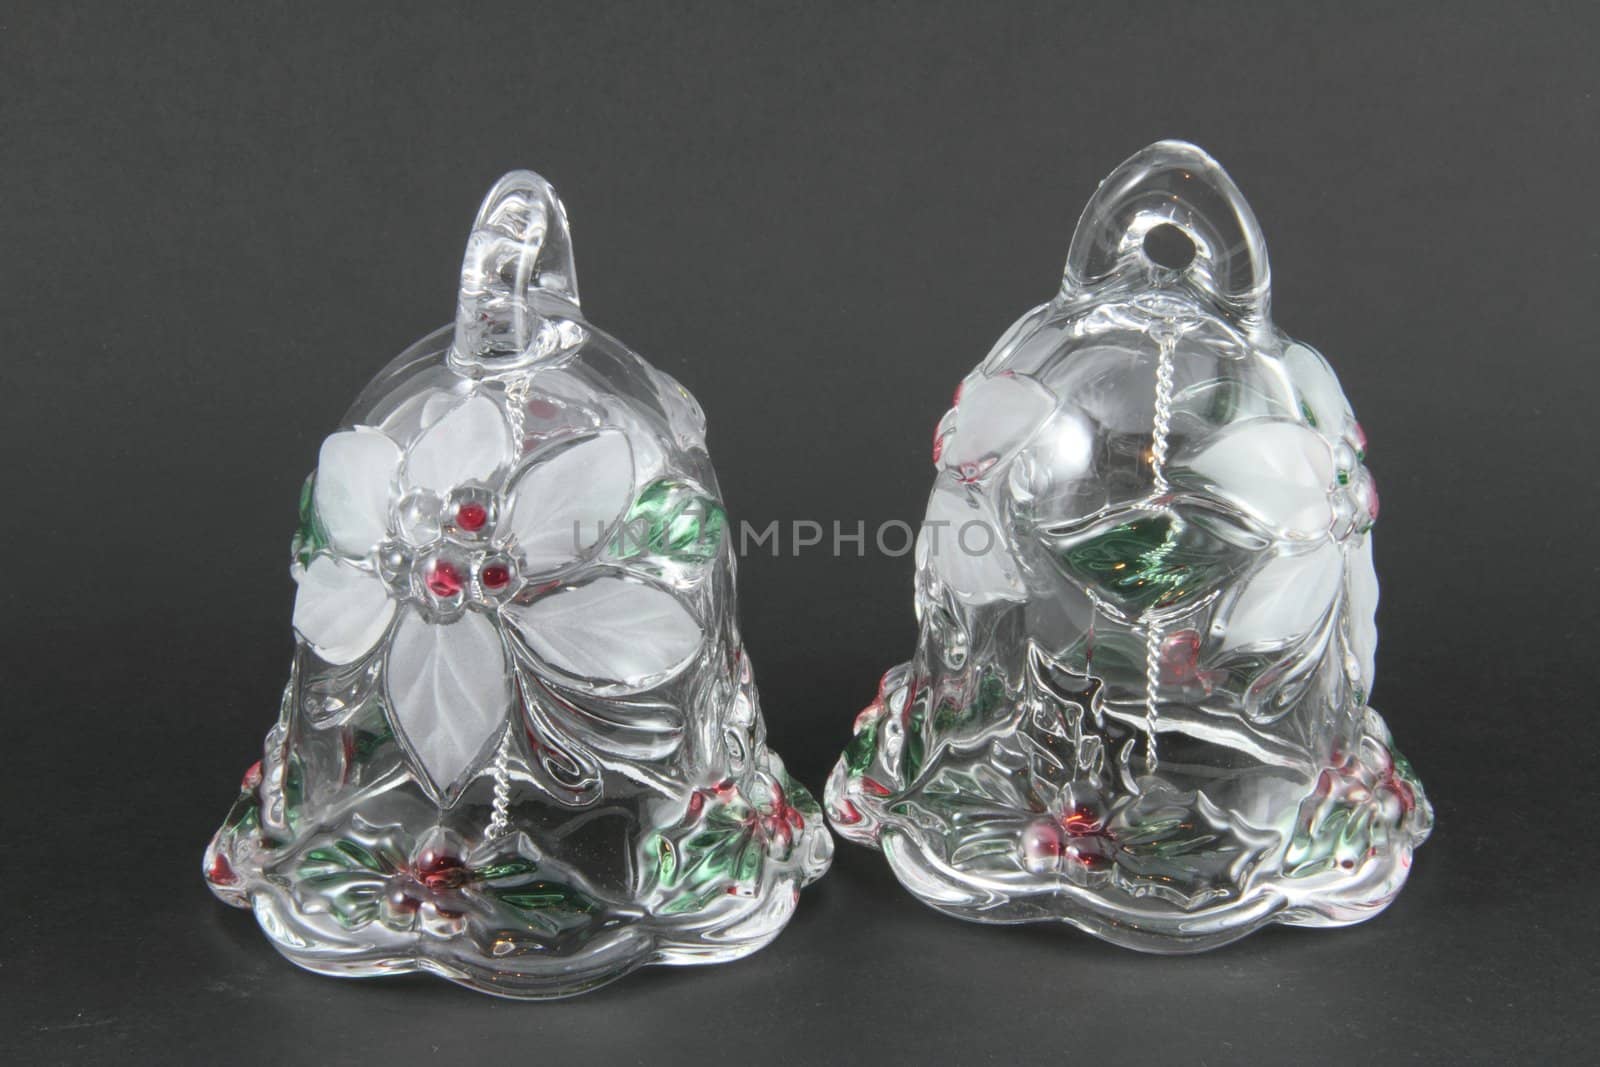 A pair of glass Christmas bells on a grey background.